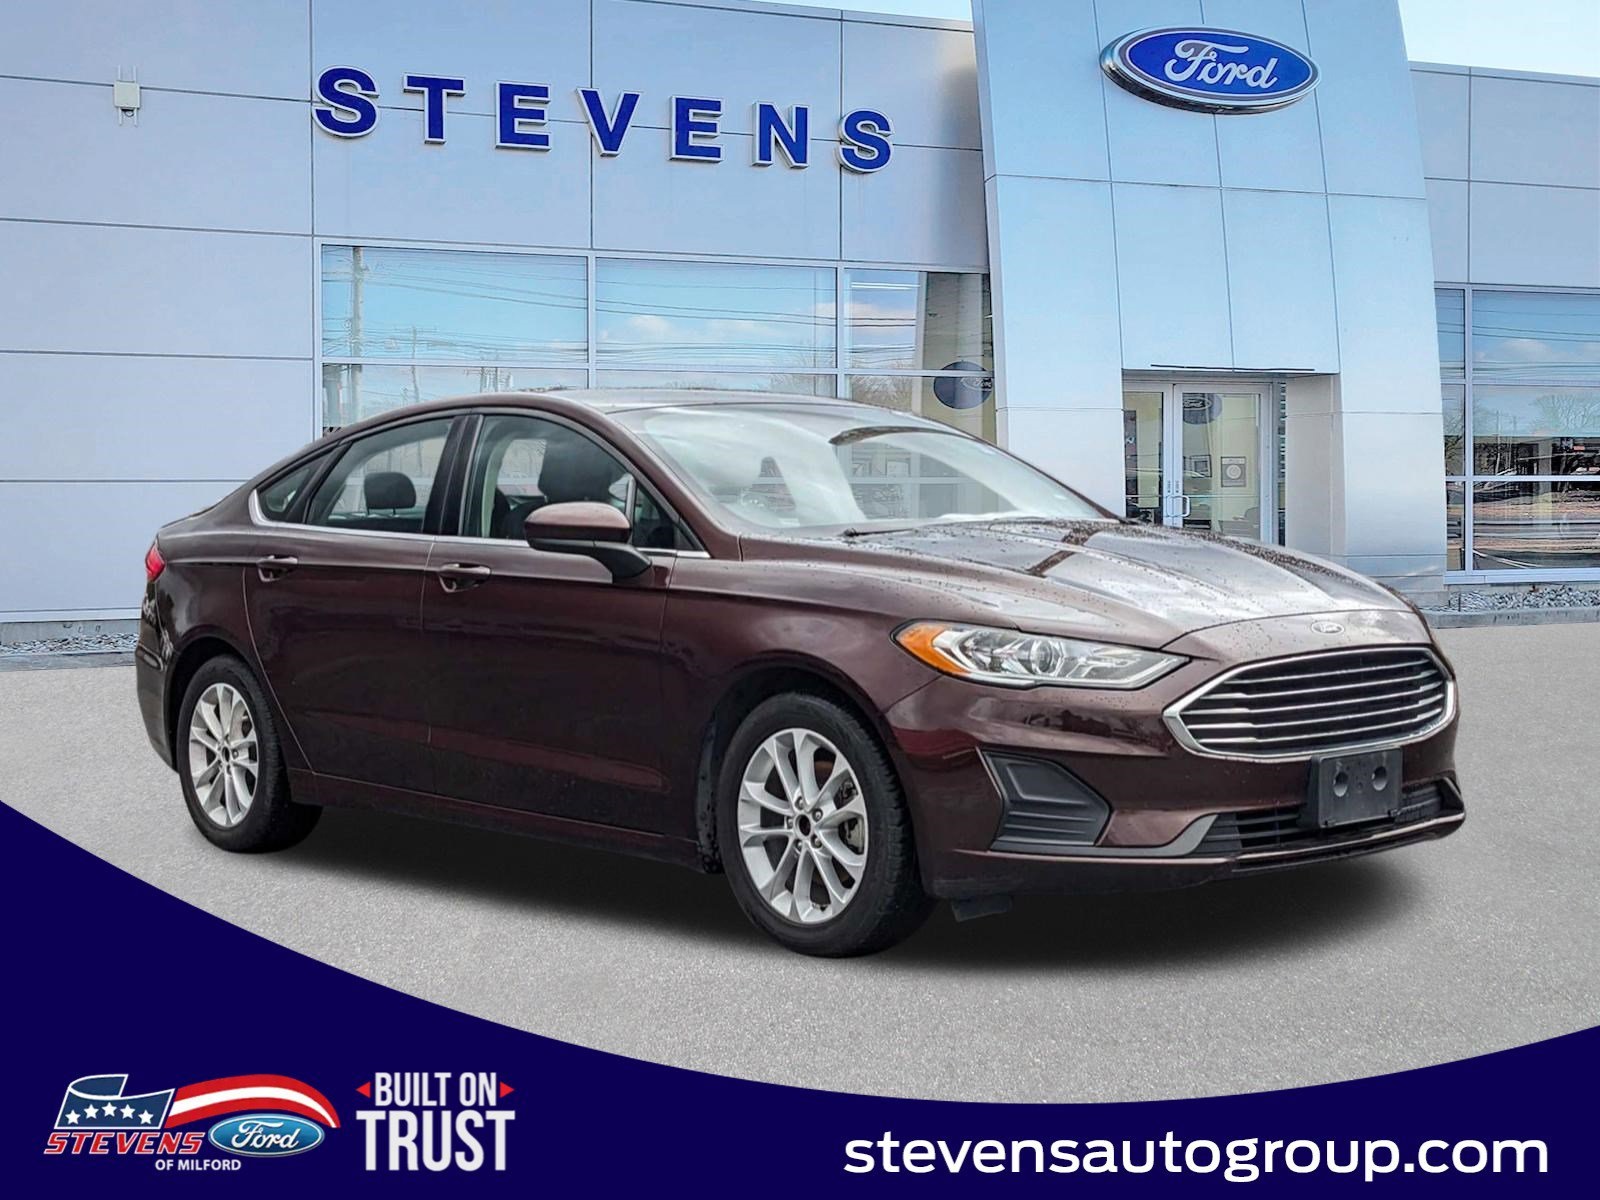 2019 Ford Fusion Milford CT